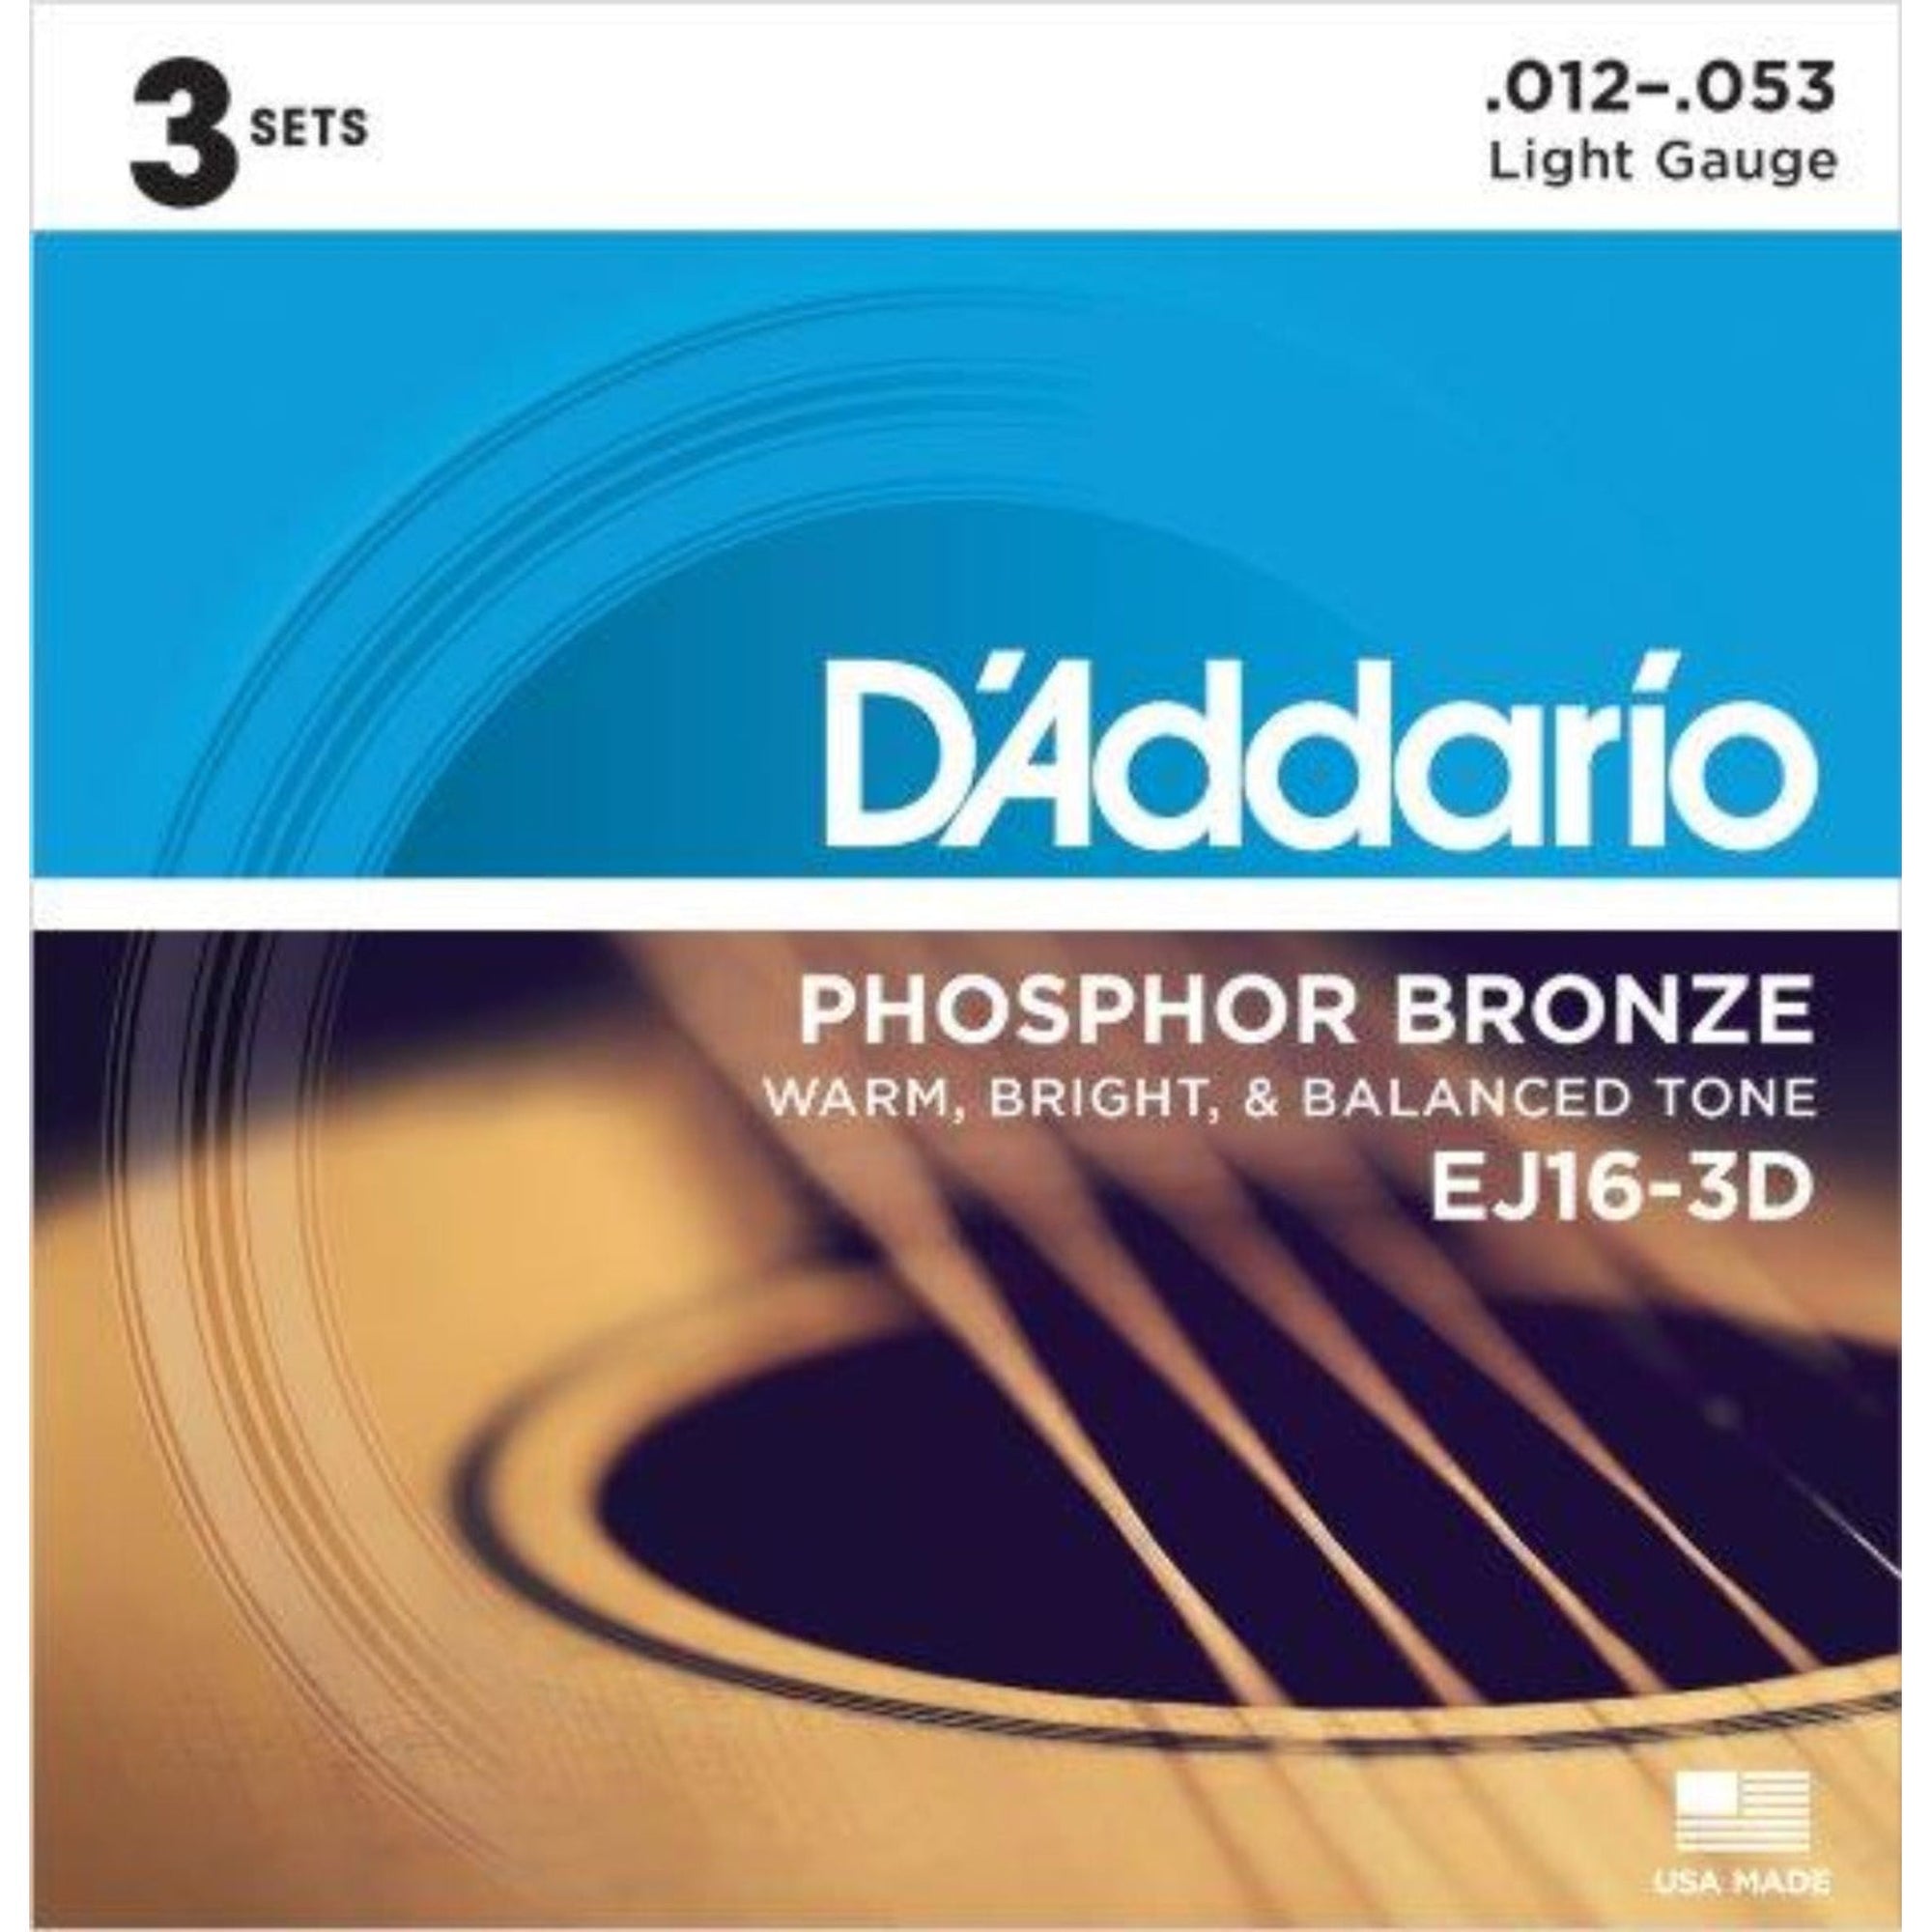 D'Addario's most popular acoustic set, EJ16 delivers the ideal balance of volume, projection and comfortable playability. Buy 3 sets and save! 